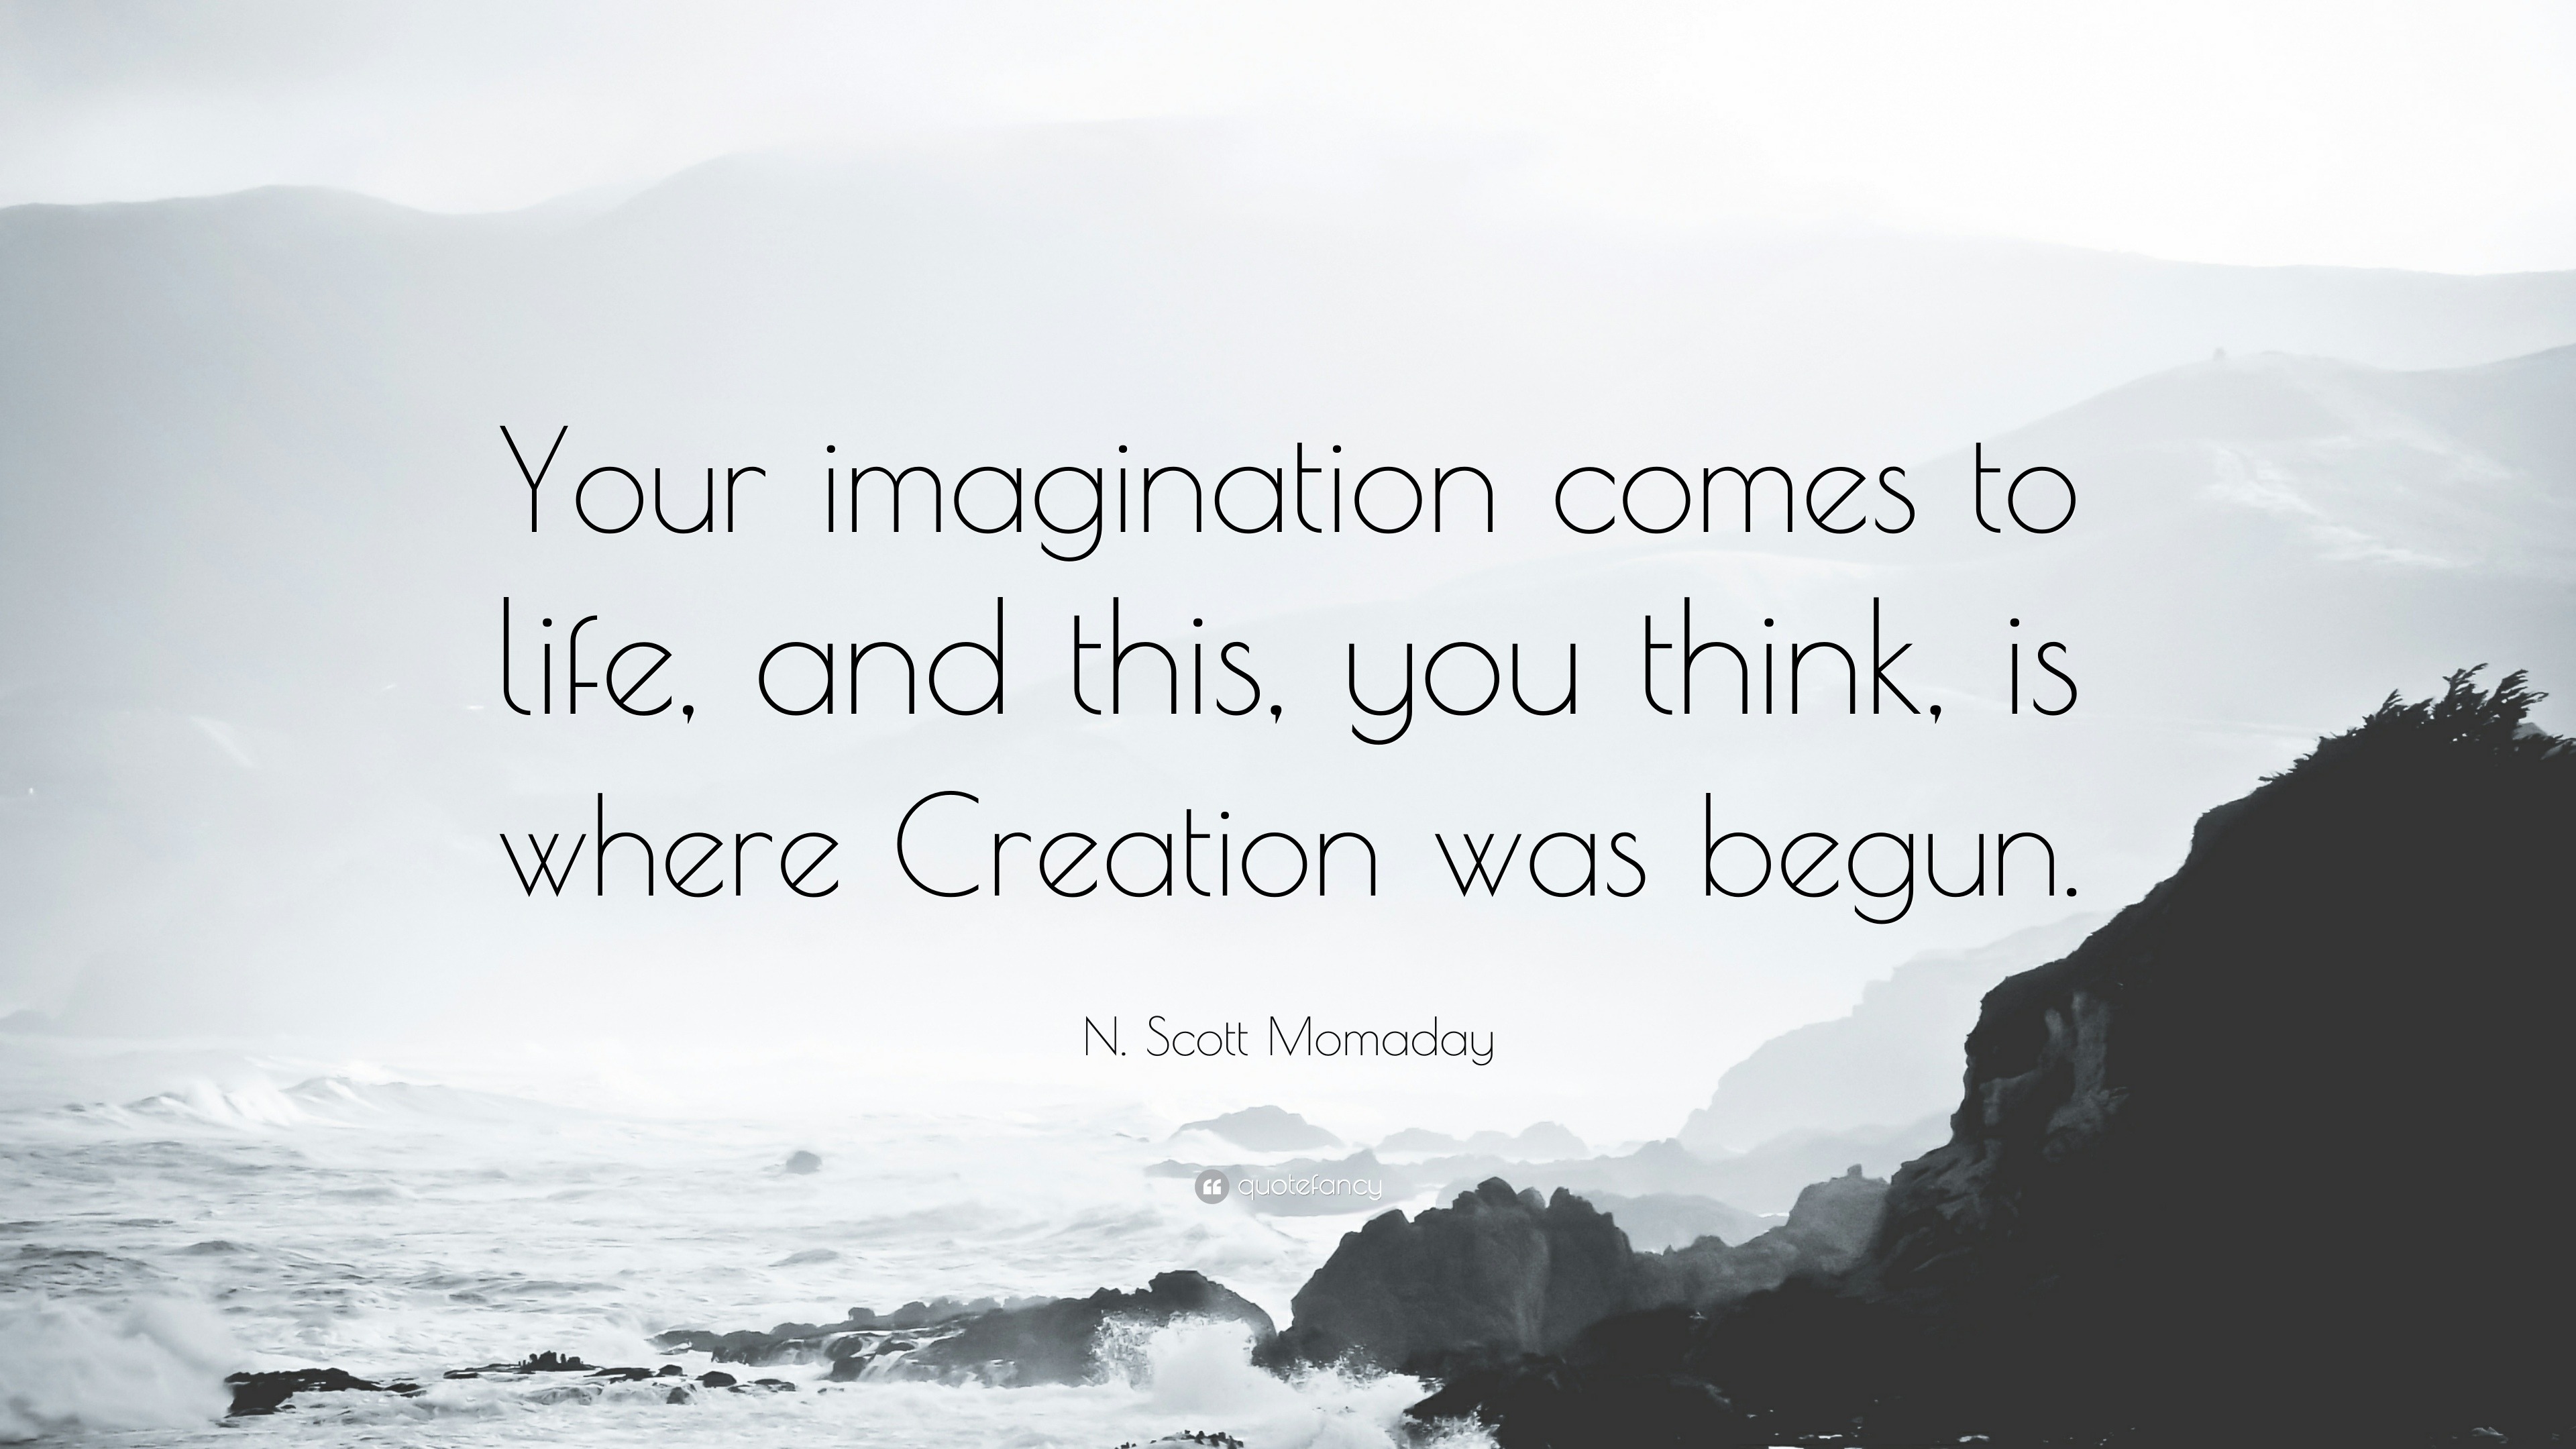 N Scott Momaday Quote “Your imagination es to life and this